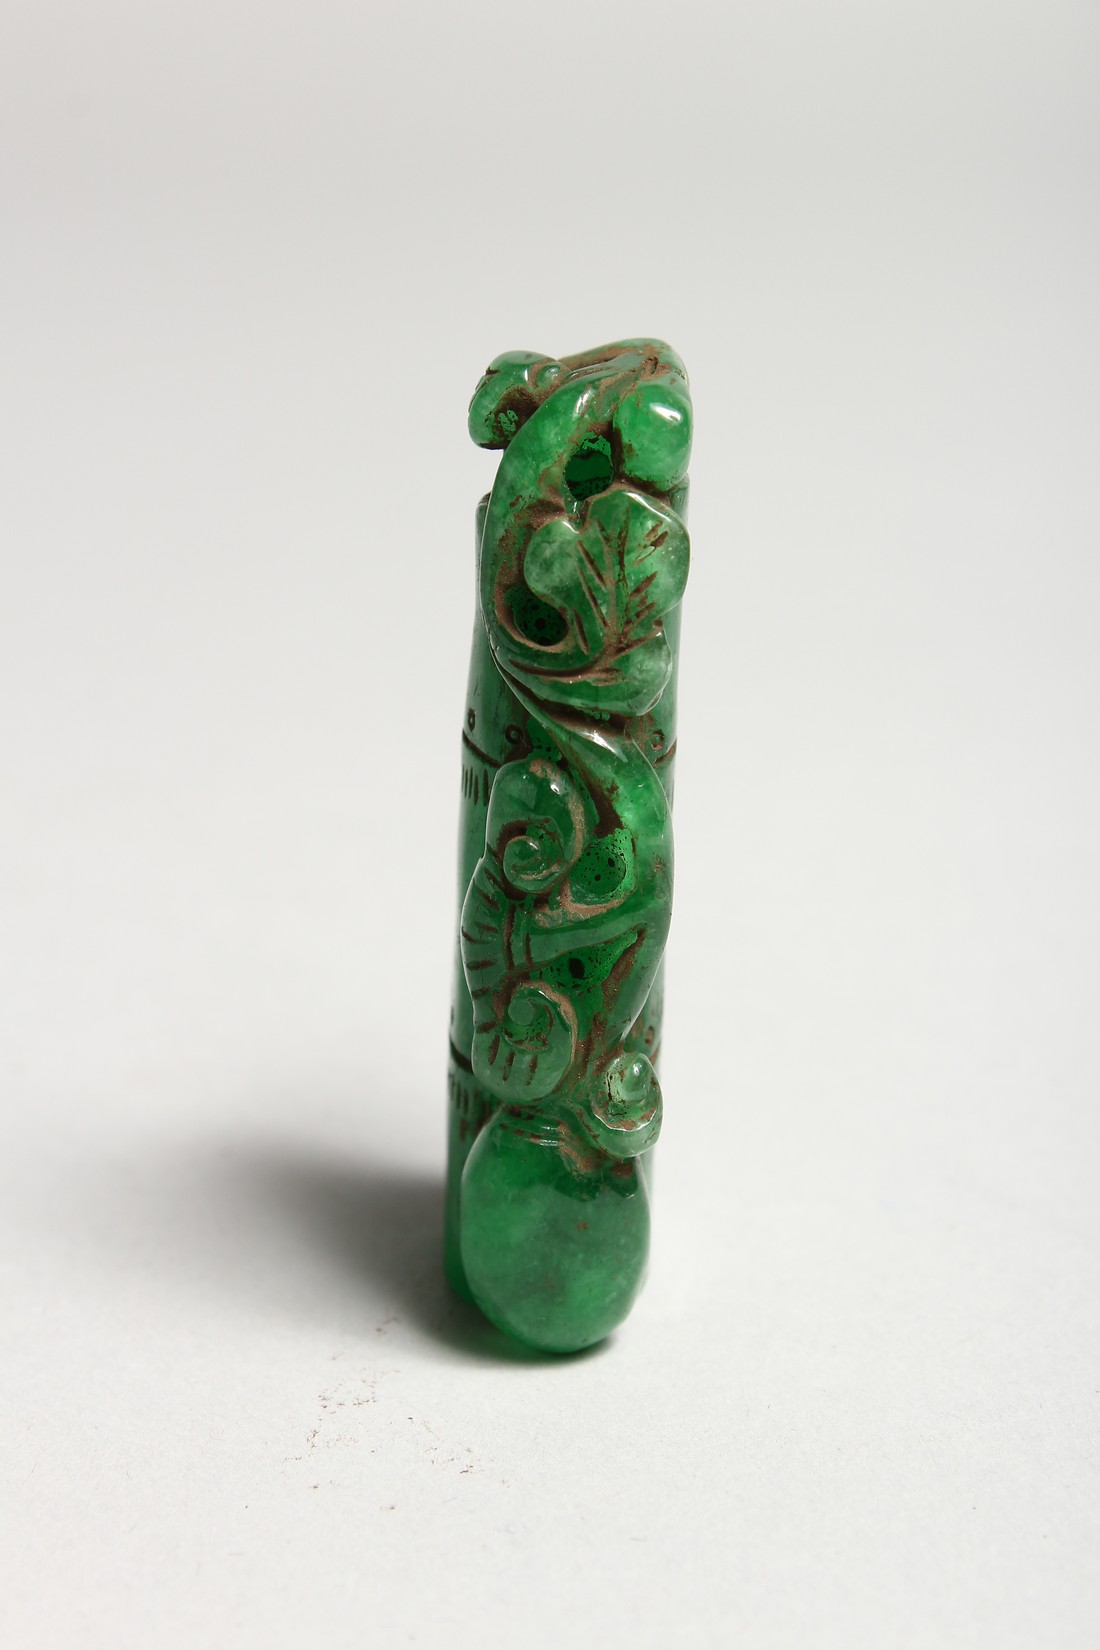 A GREEN JADE PENDANT 2.5ins - Image 2 of 5